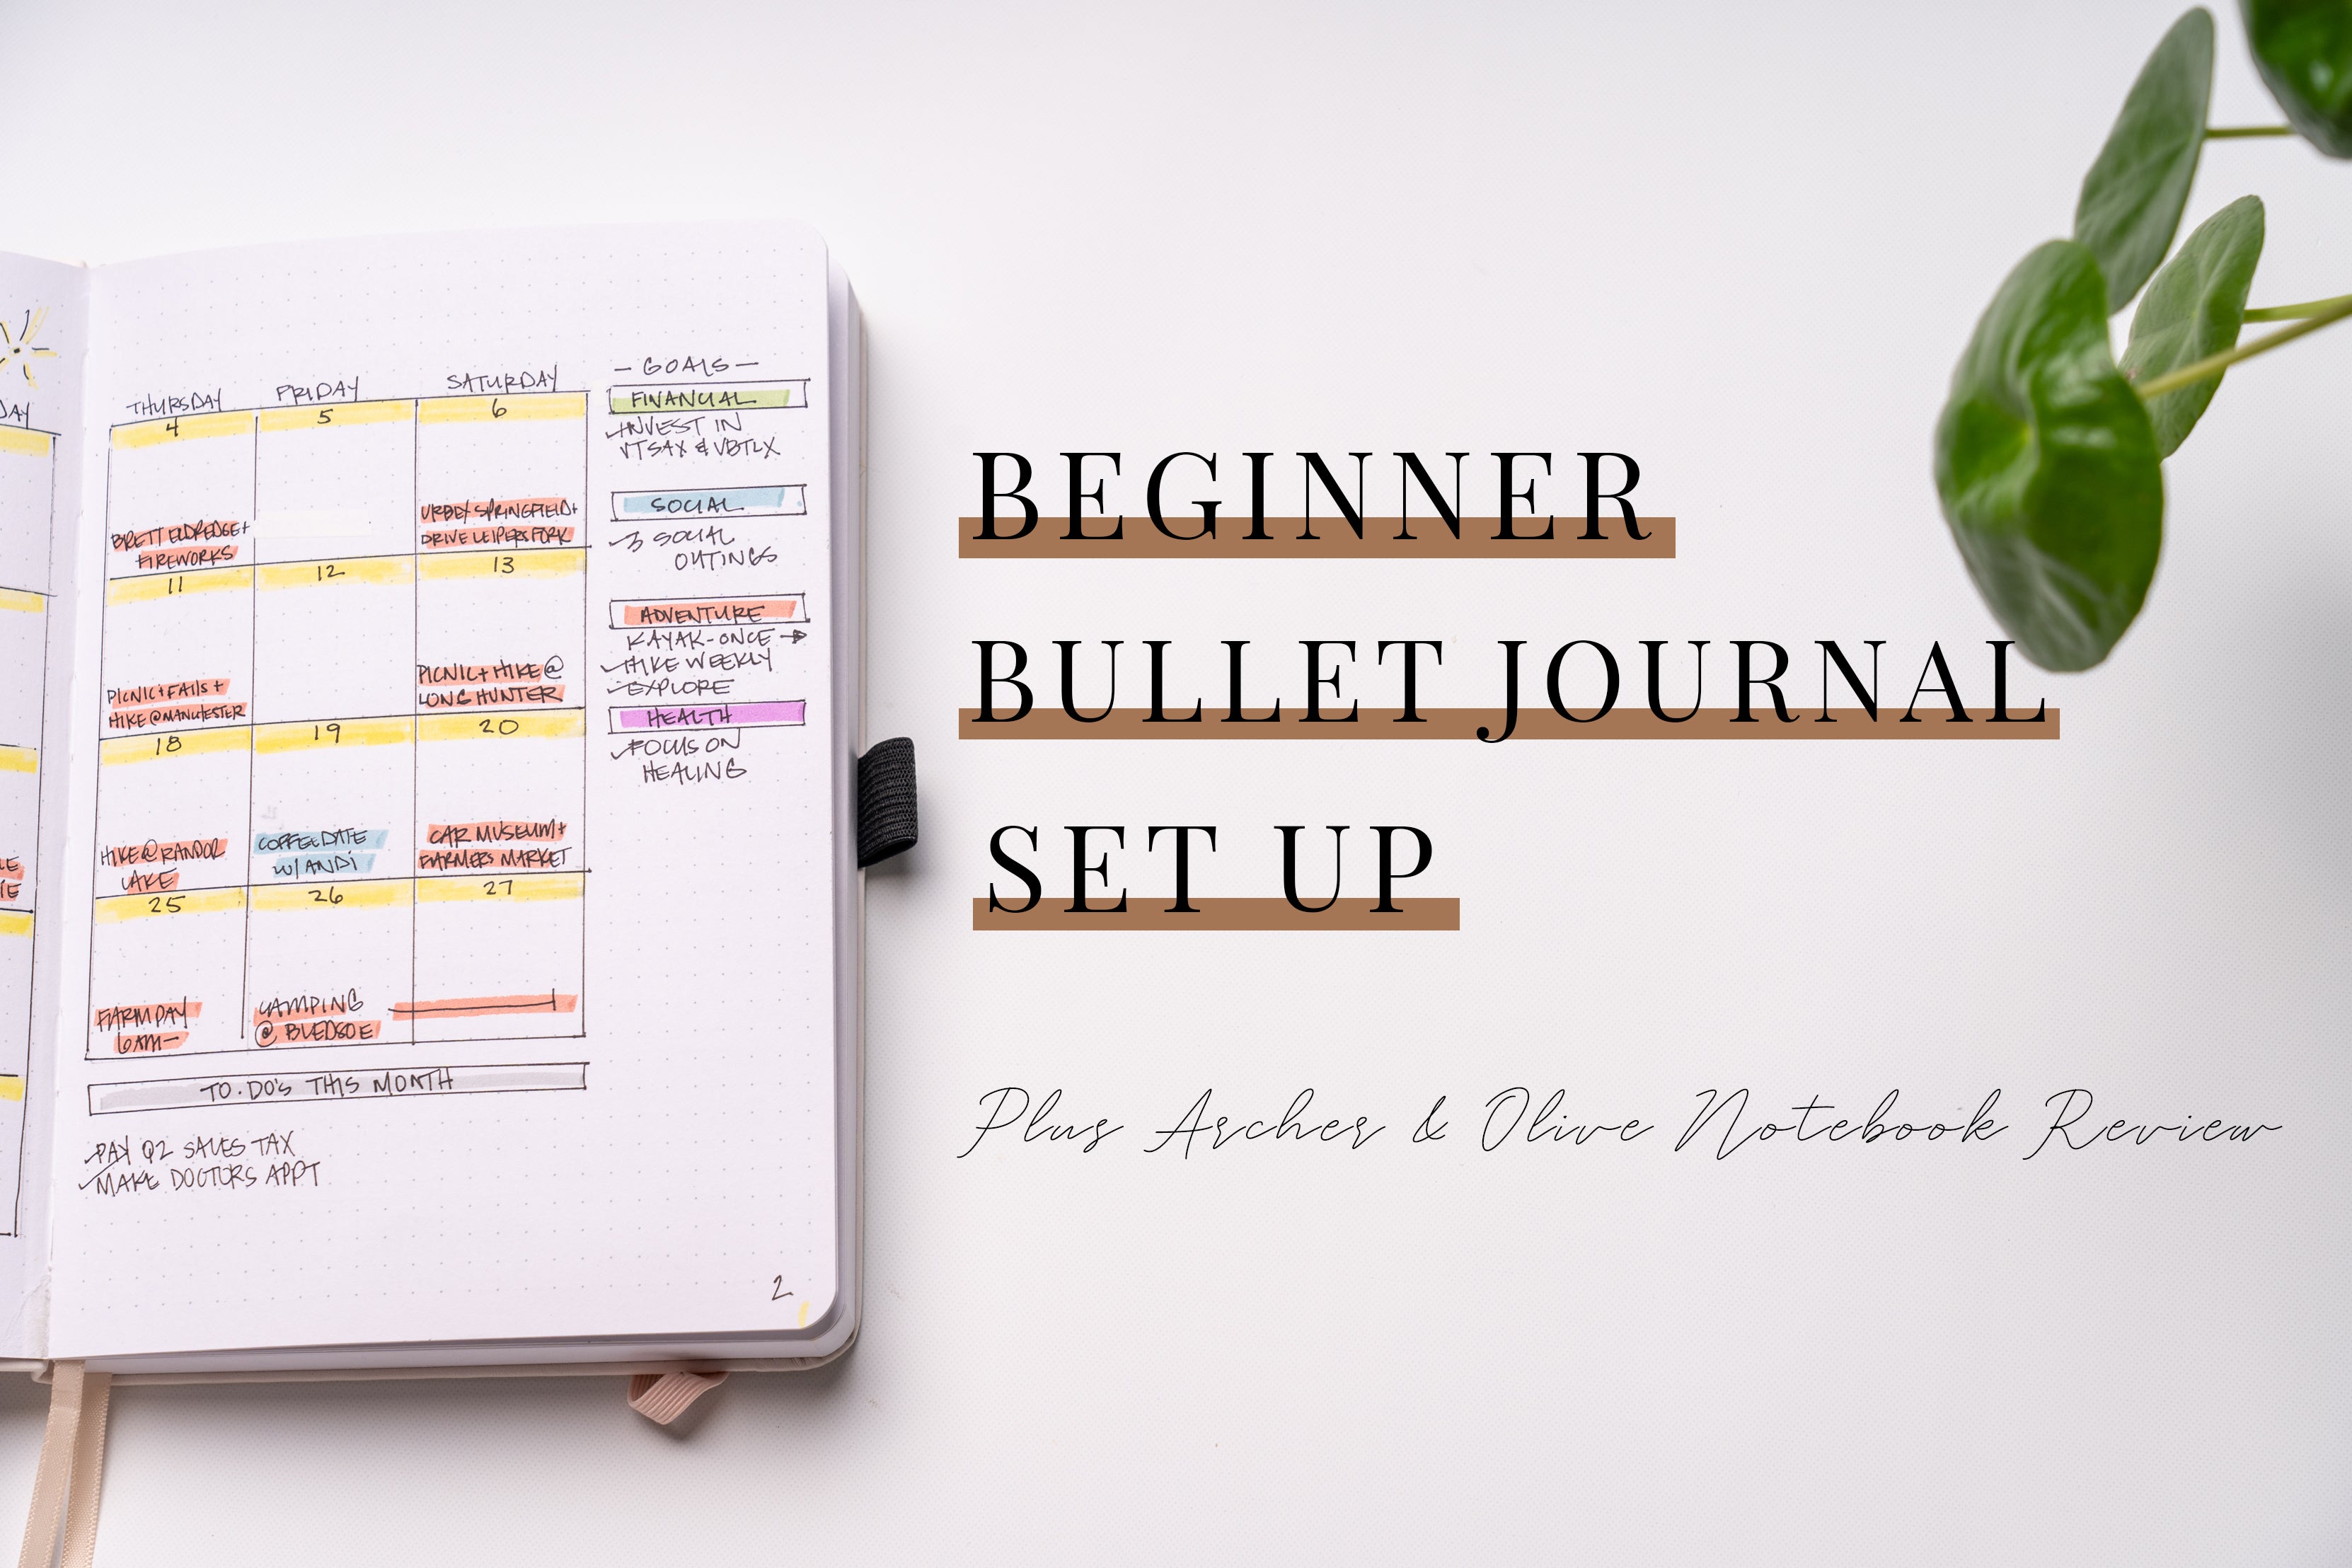 How to clean Archer & Olive bullet journal cover? : r/bulletjournal